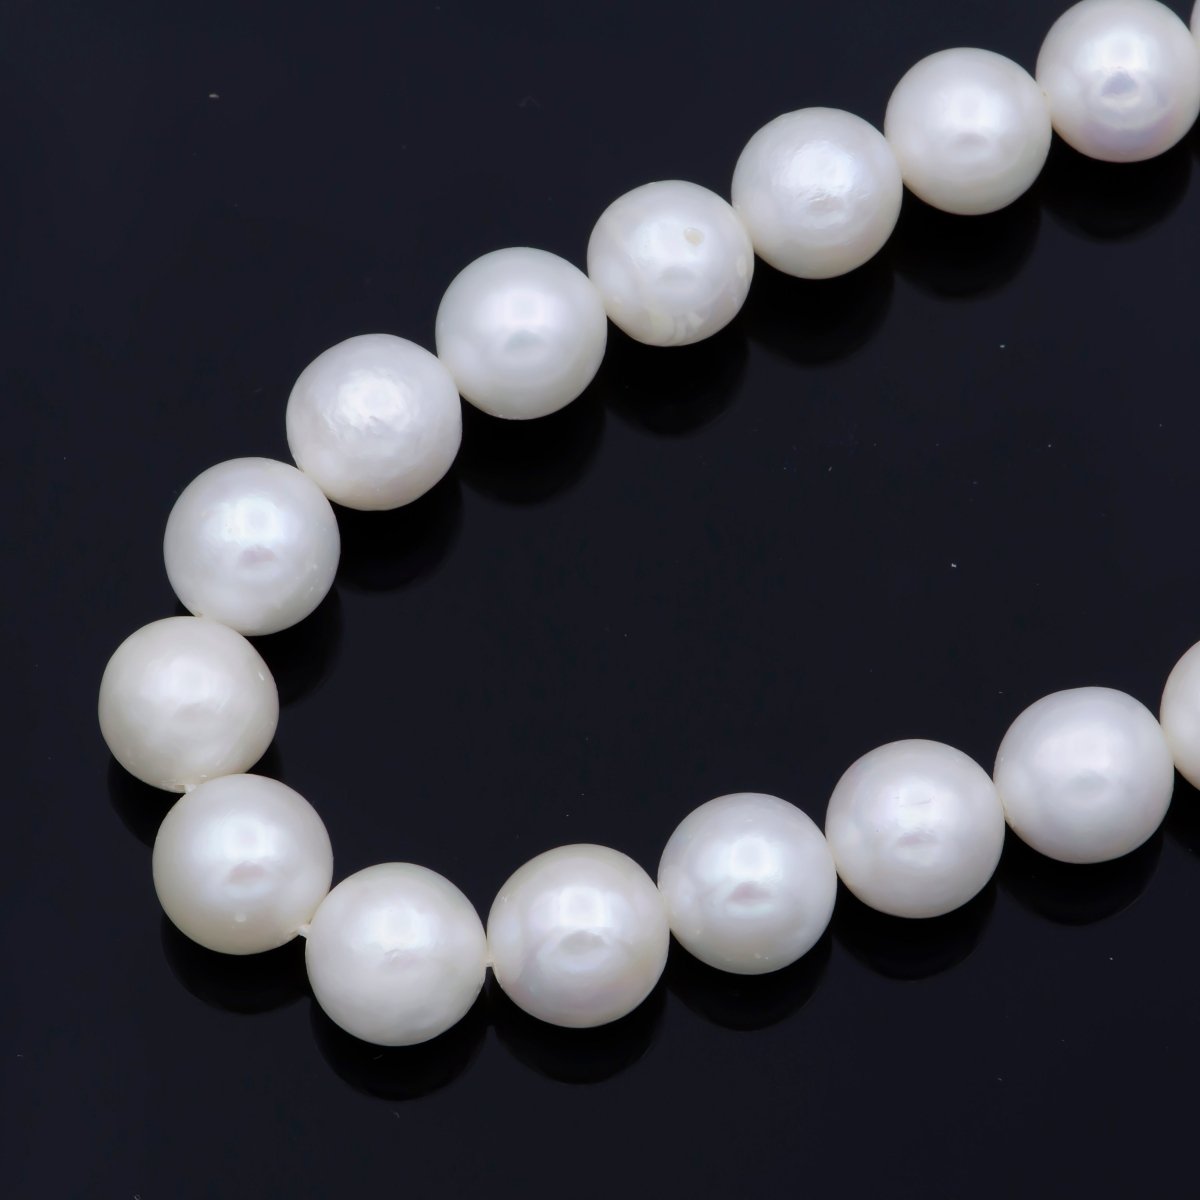 Wholesale 8-9mm AAA Natural White Round Freshwater Pearls Genuine High Luster Smooth And Round White Freshwater Pearl Beads | WA-083 Clearance Pricing - DLUXCA